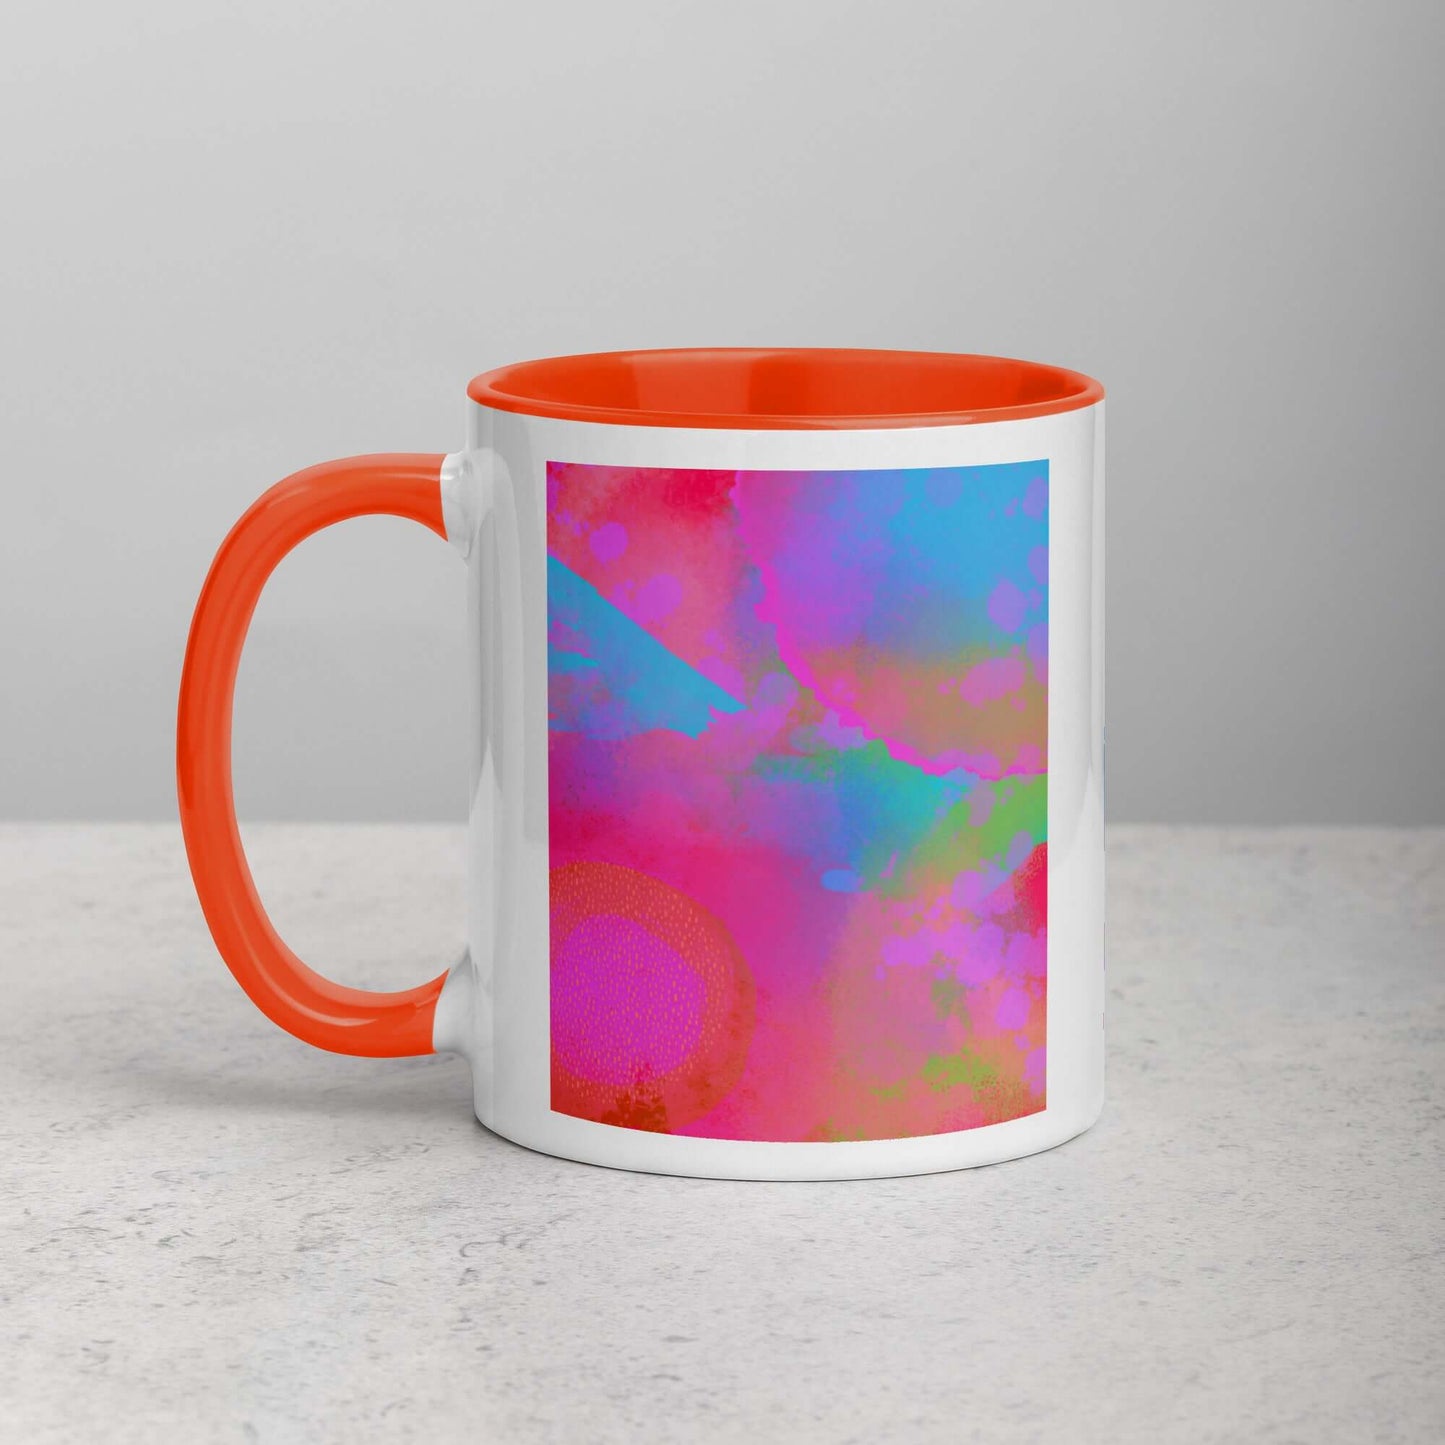 Hot Pink Intergalactic “Between Worlds” Abstract Art Mug with Deep Orange Color Inside Left Handed Front View